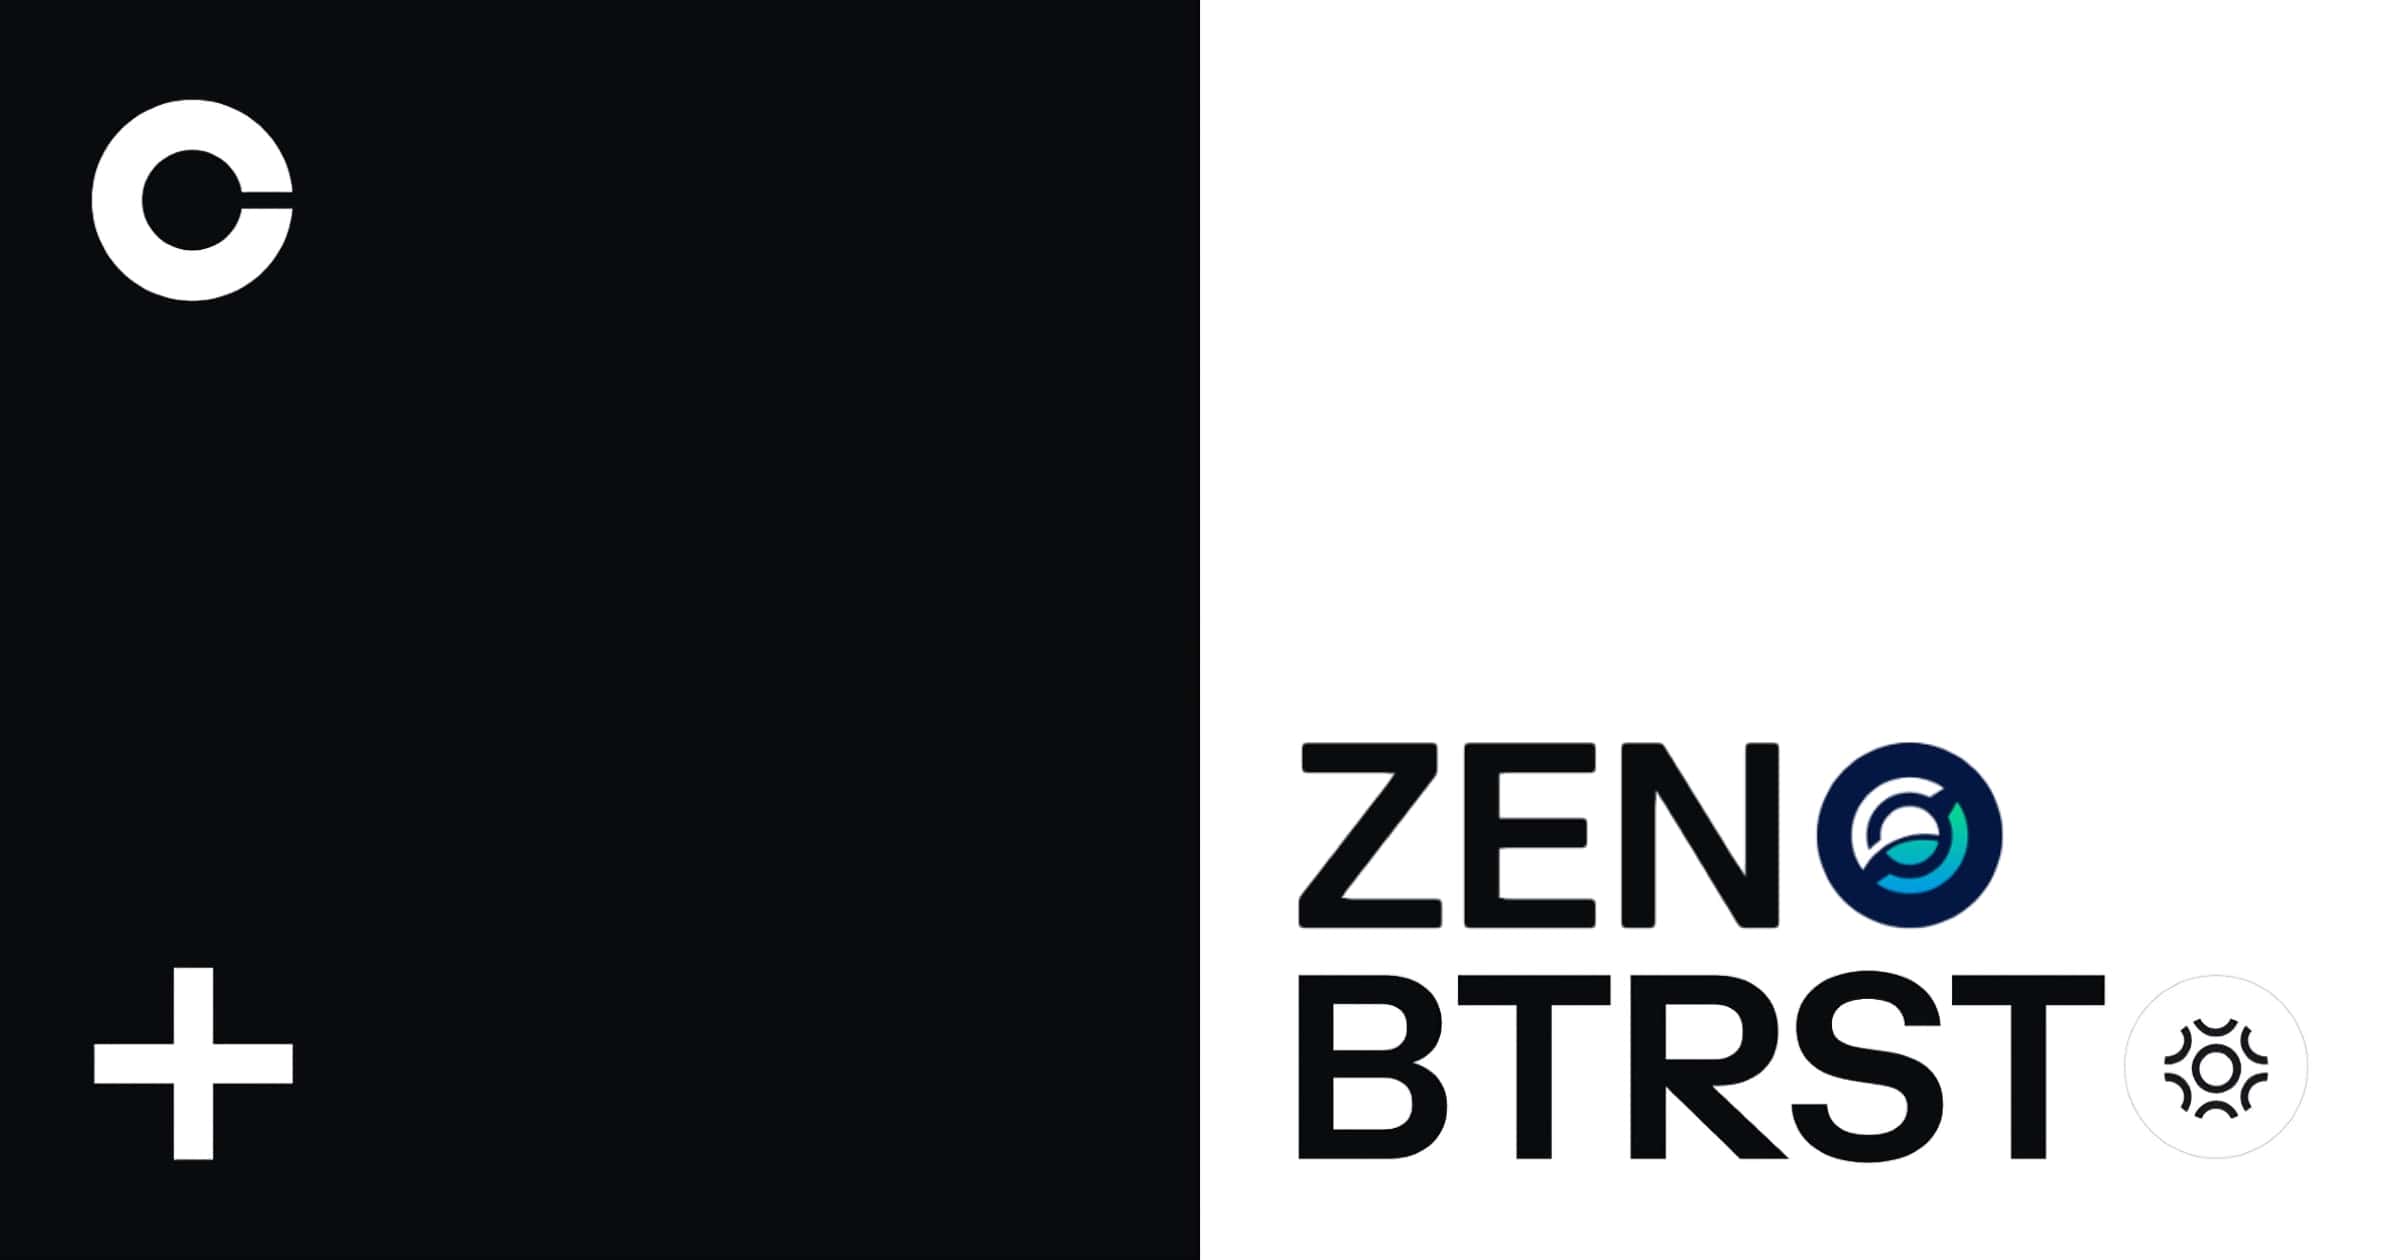 ZEN and BTRST on coinbase pro